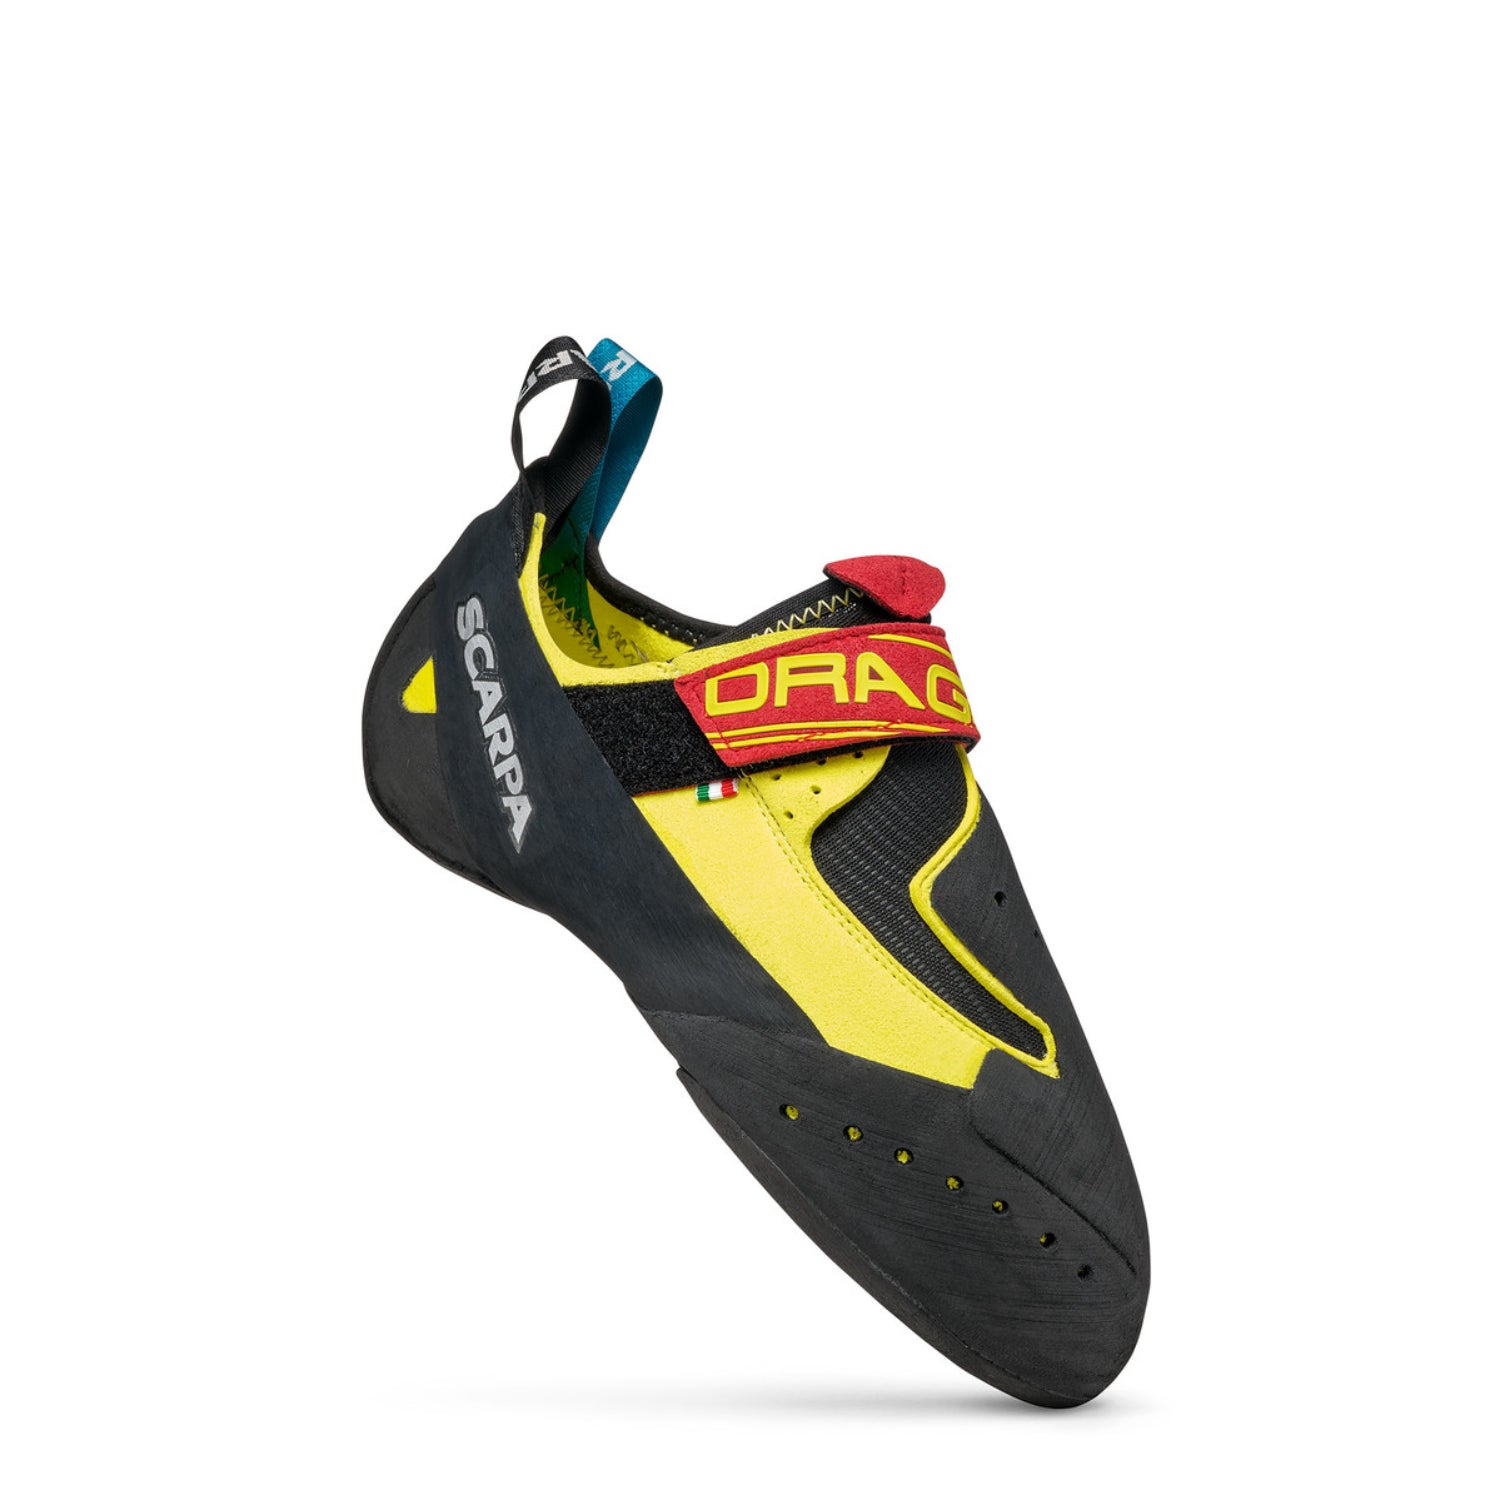  SCARPA Drago Rock Climbing Shoes for Sport Climbing and  Bouldering - Specialized Performance for Sensitivity - Yellow - 3-3.5